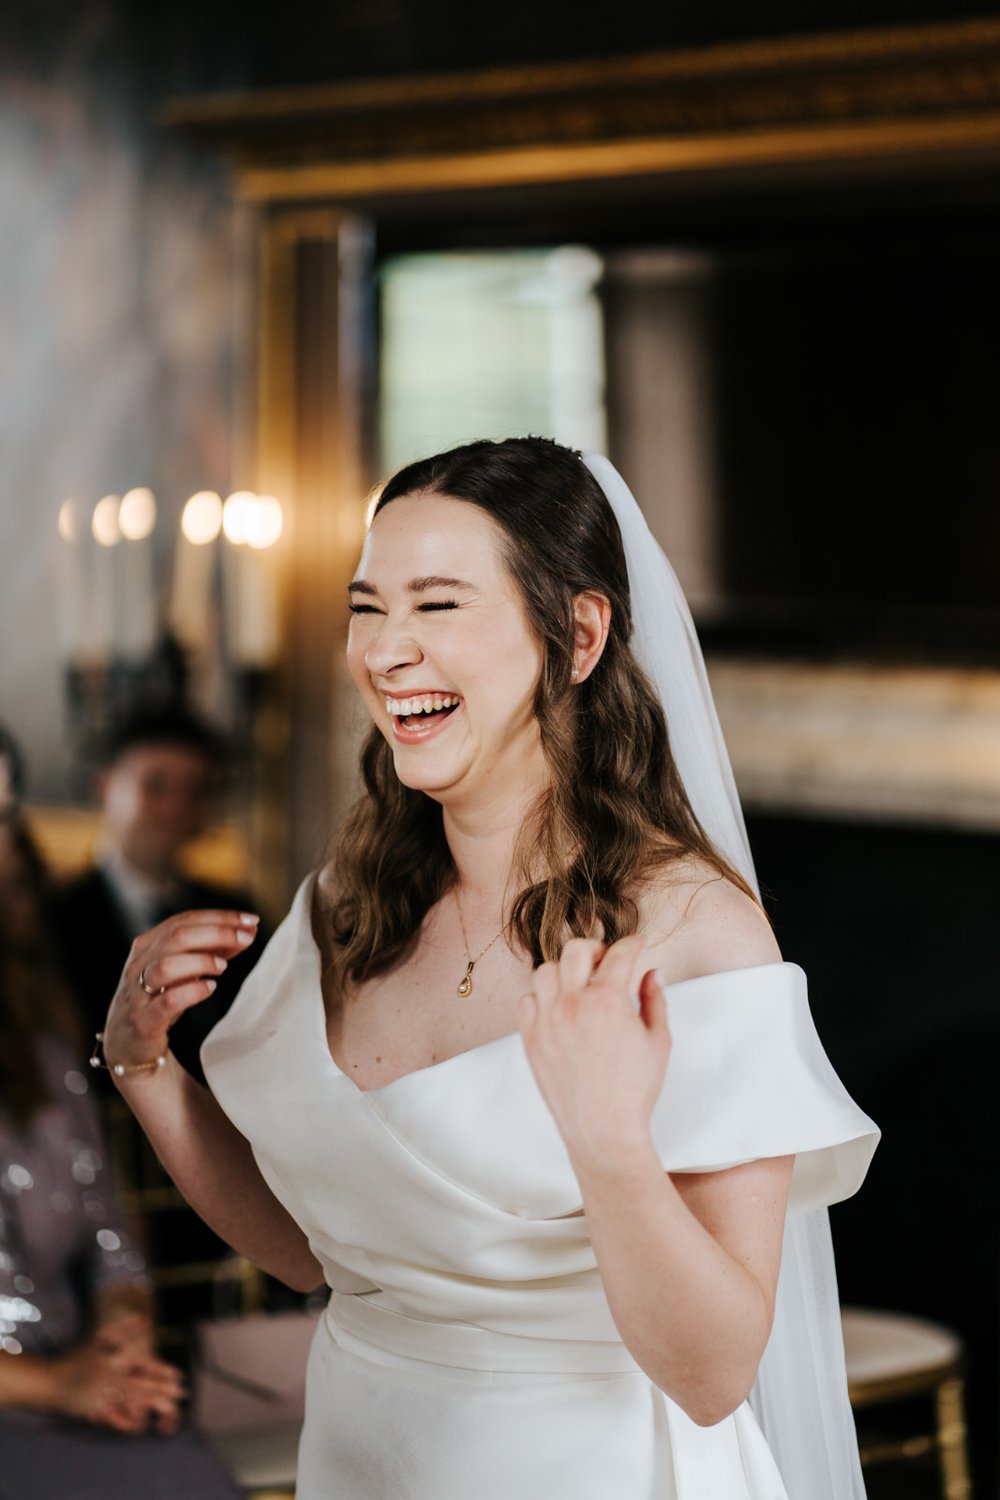 Bride smiles and cannot contain her excitement during Little Banqueting House, Hampton Court Palace wedding ceremony while wearing Eva Lendel wedding gown